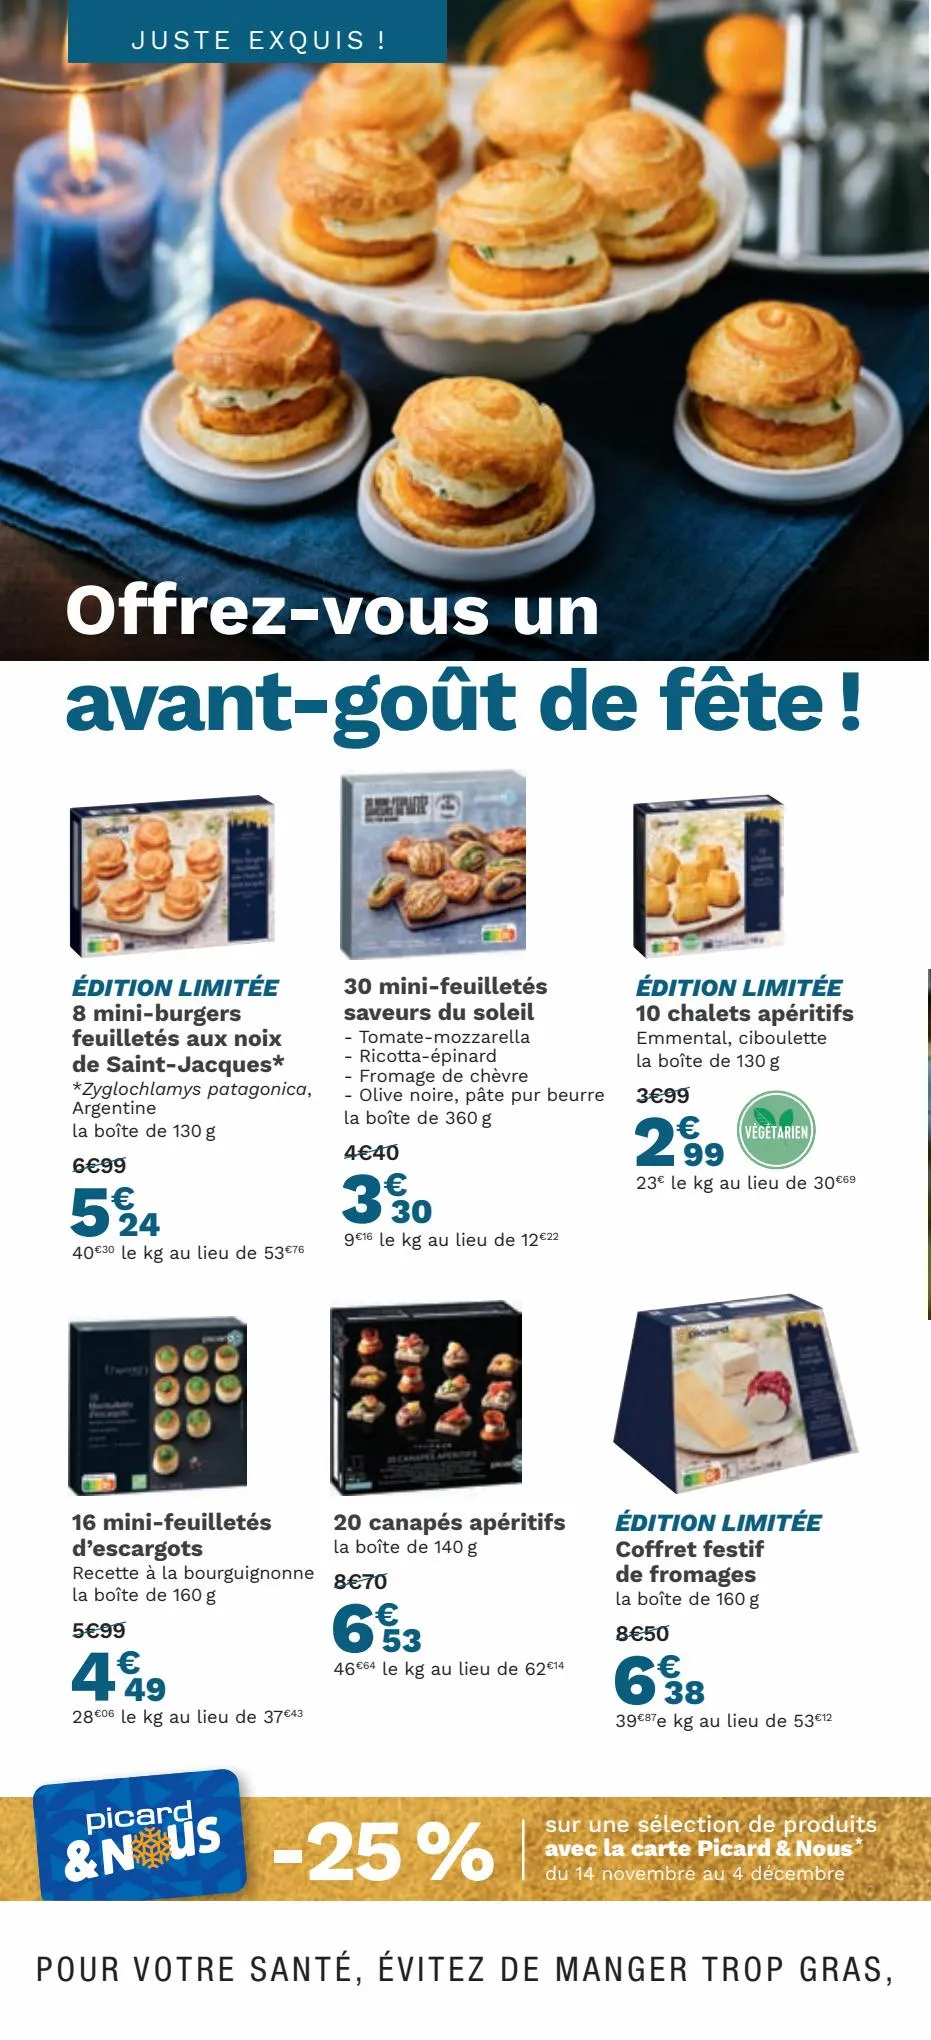 Catalogue Picard Promotions, page 00002